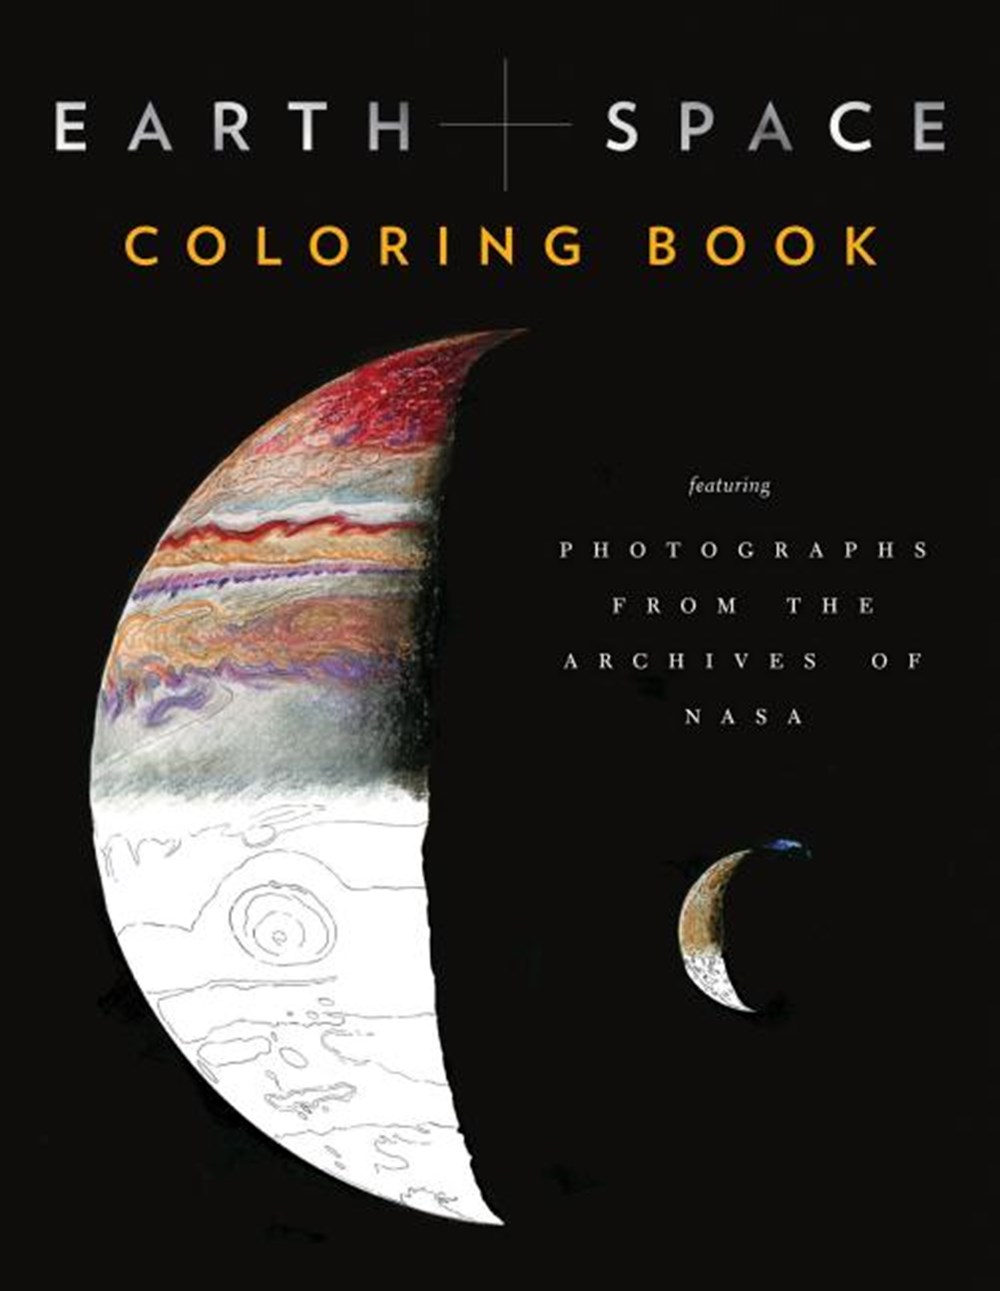 Earth and Space Coloring Book Featuring Photographs from the Archives of NASA (Adult Coloring Books,